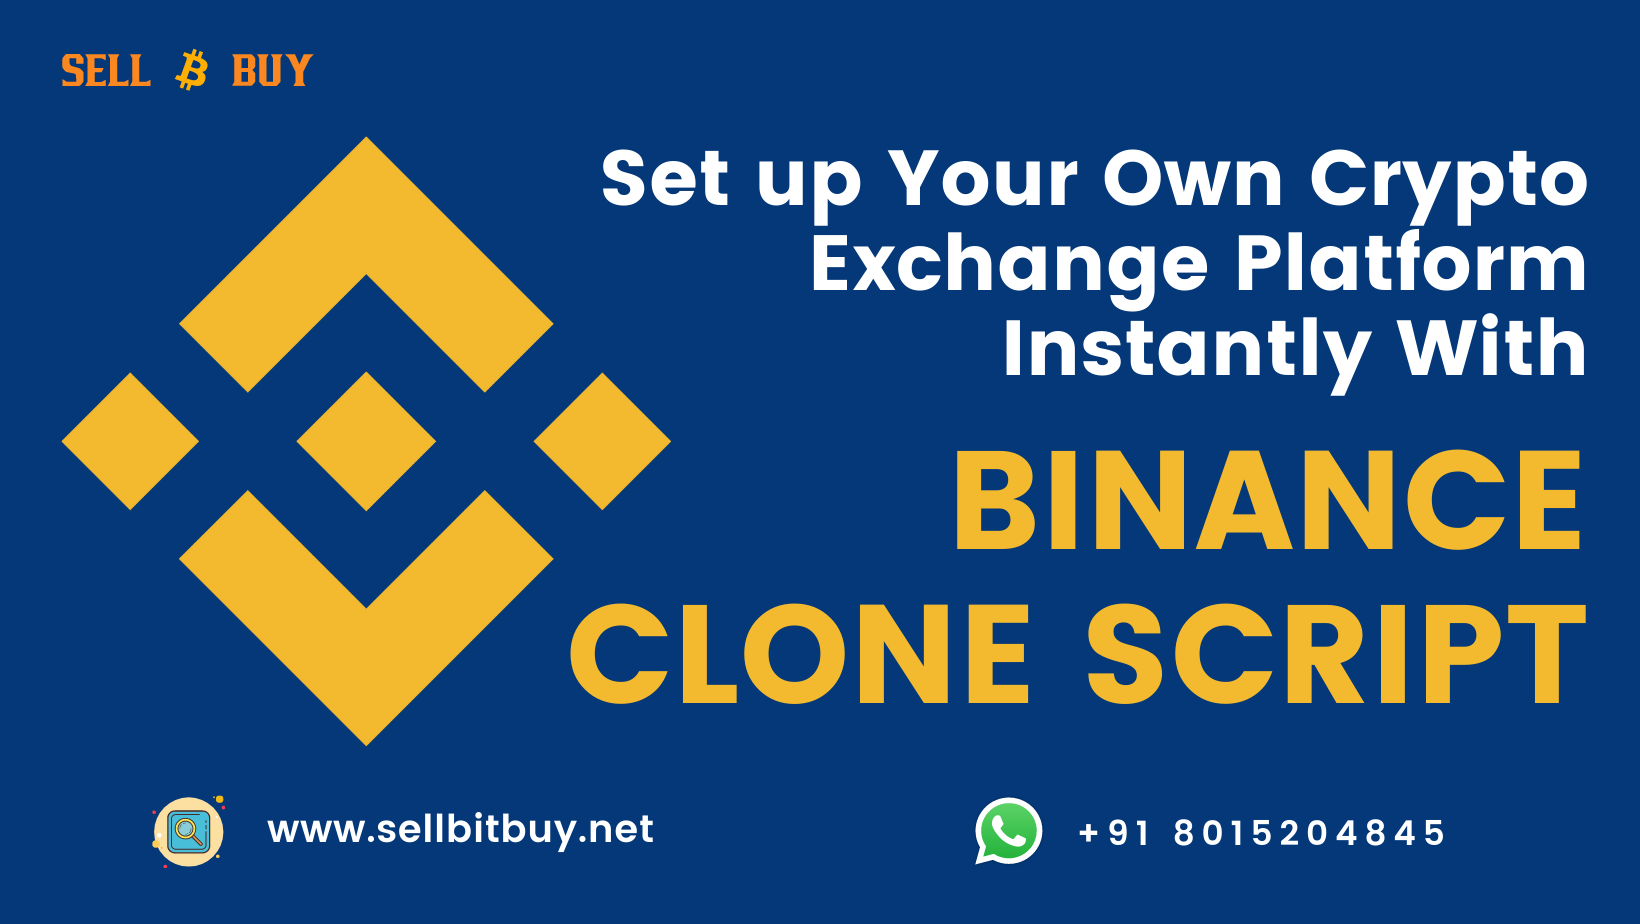 Article about Set Up Your Own Crypto Exchange Platform Instantly With Binance Clone Script